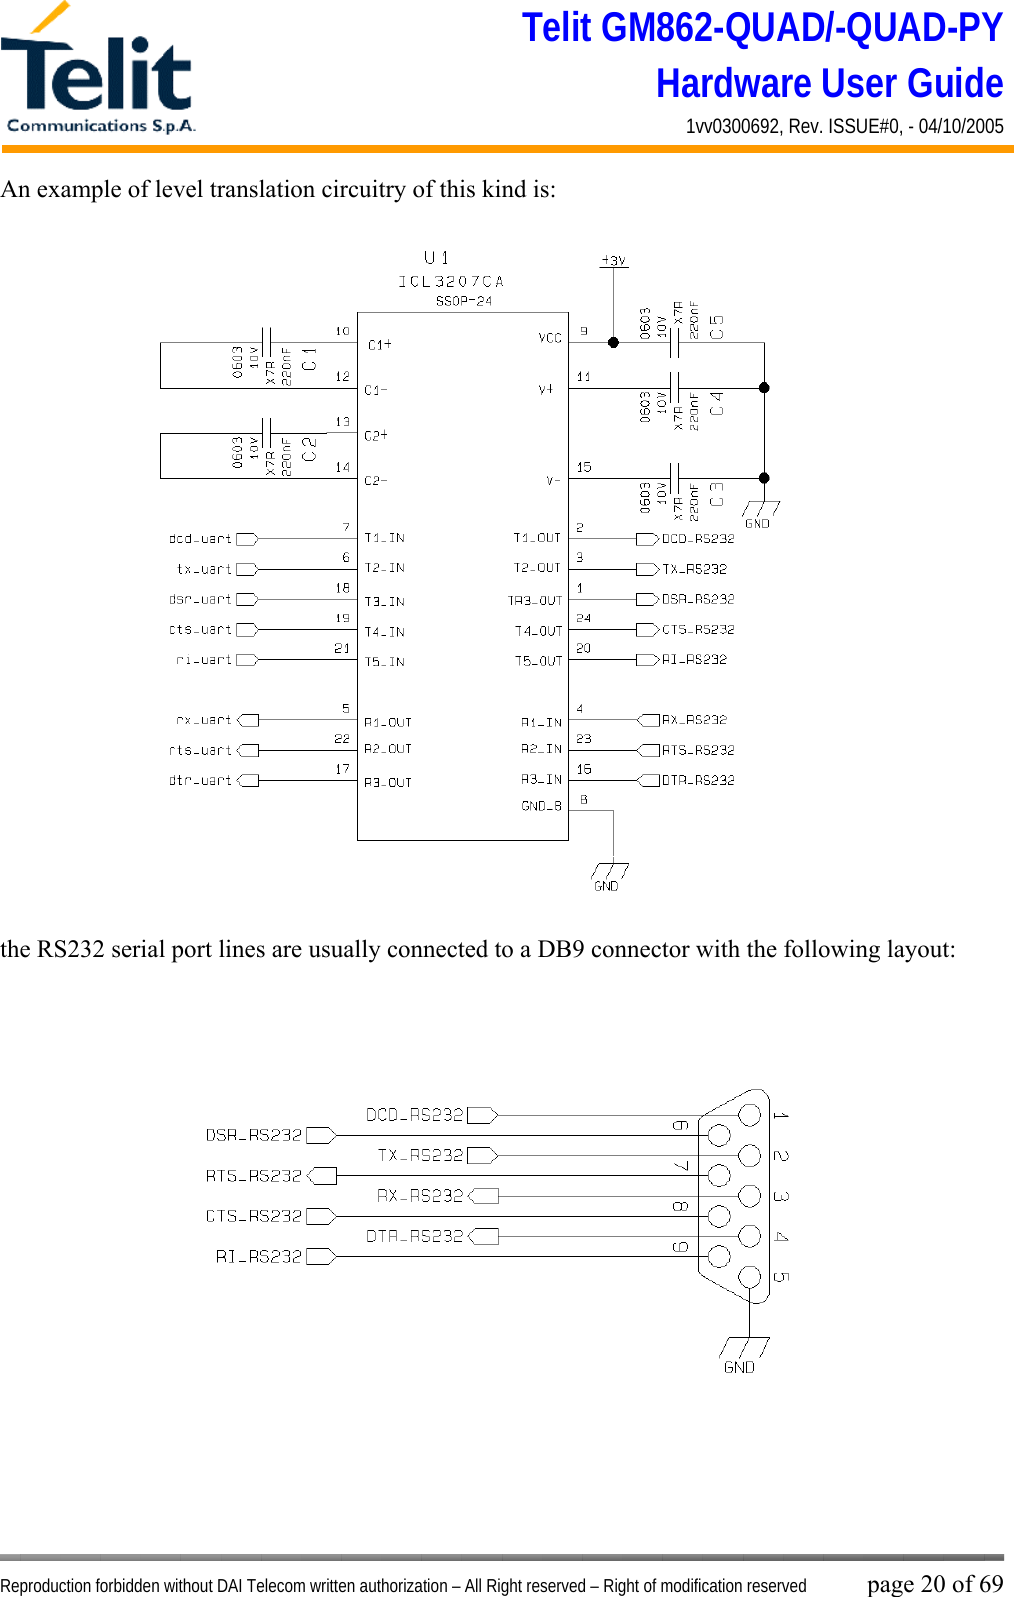 Telit GM862-QUAD/-QUAD-PY Hardware User Guide 1vv0300692, Rev. ISSUE#0, - 04/10/2005   Reproduction forbidden without DAI Telecom written authorization – All Right reserved – Right of modification reserved page 20 of 69 An example of level translation circuitry of this kind is:  the RS232 serial port lines are usually connected to a DB9 connector with the following layout: 